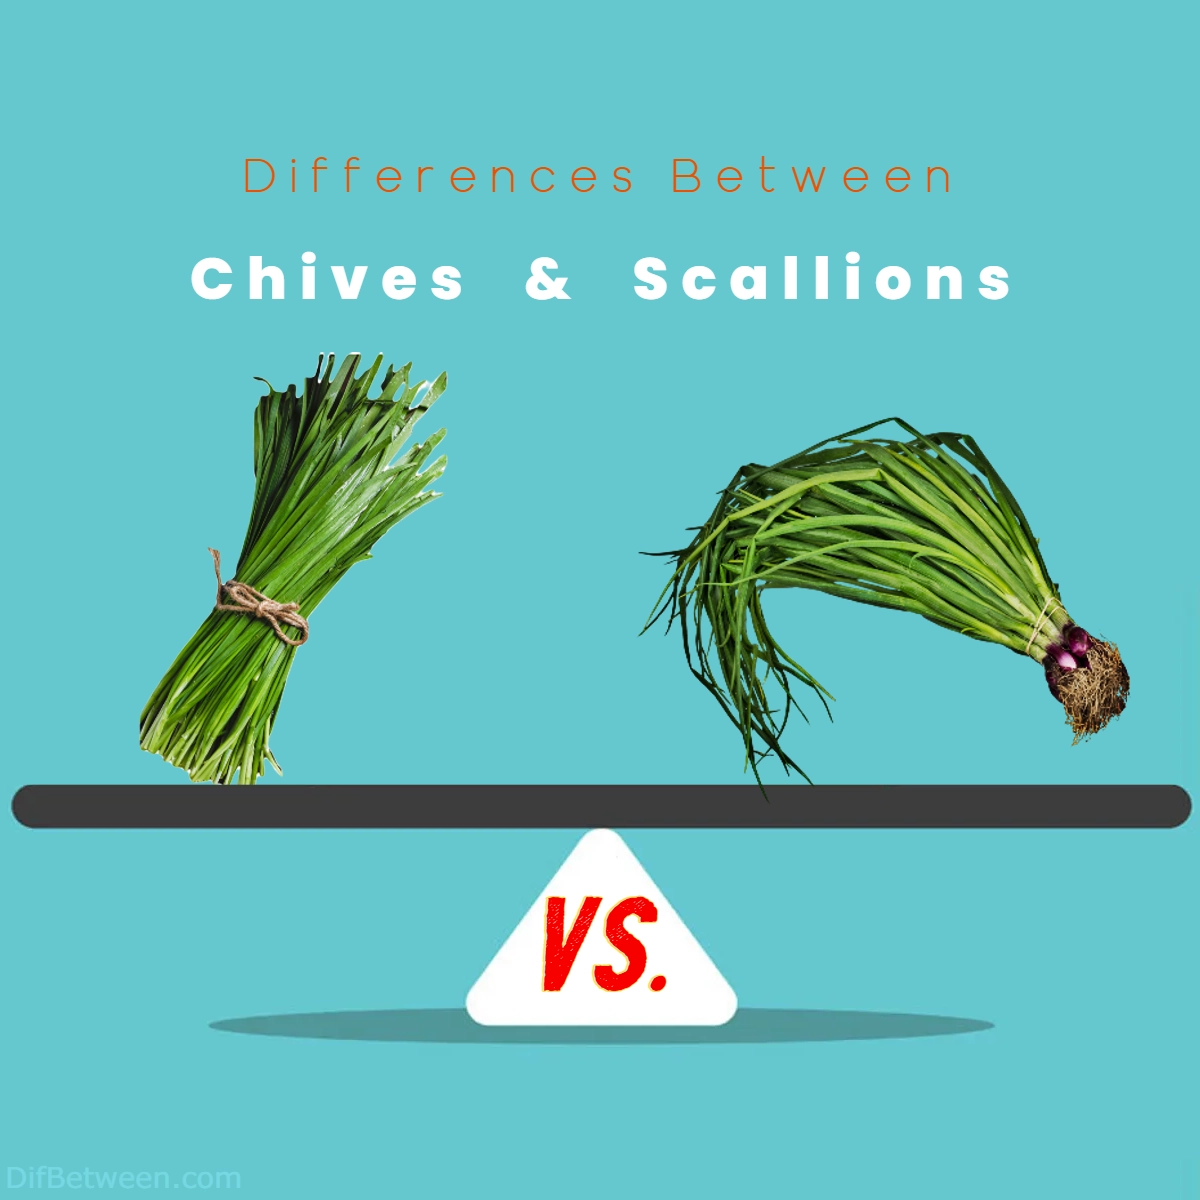 Difference Between Chives and Scallions